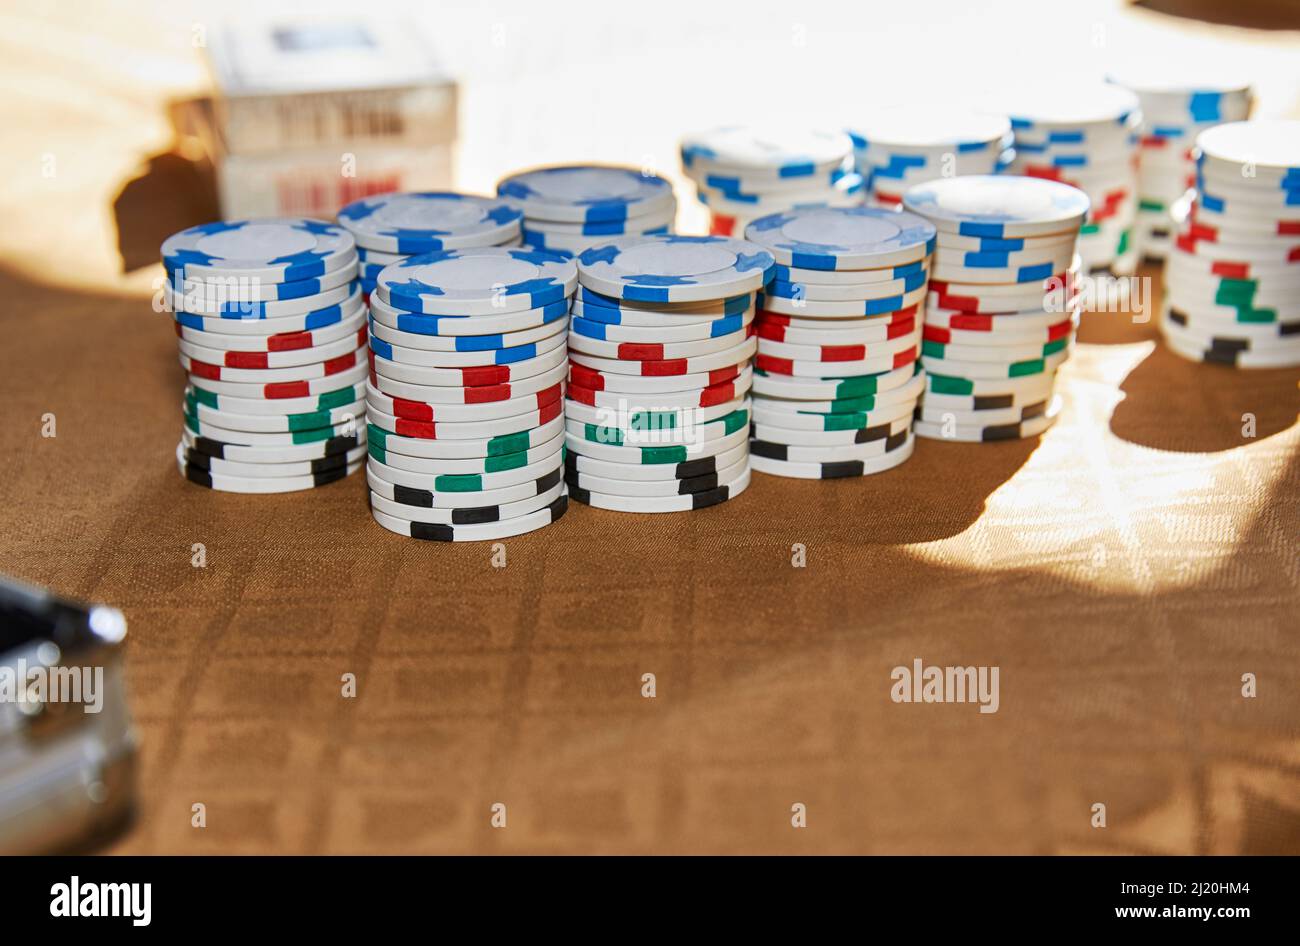 Poker Chips stacked on a table with shallow depth of field Stock Photo